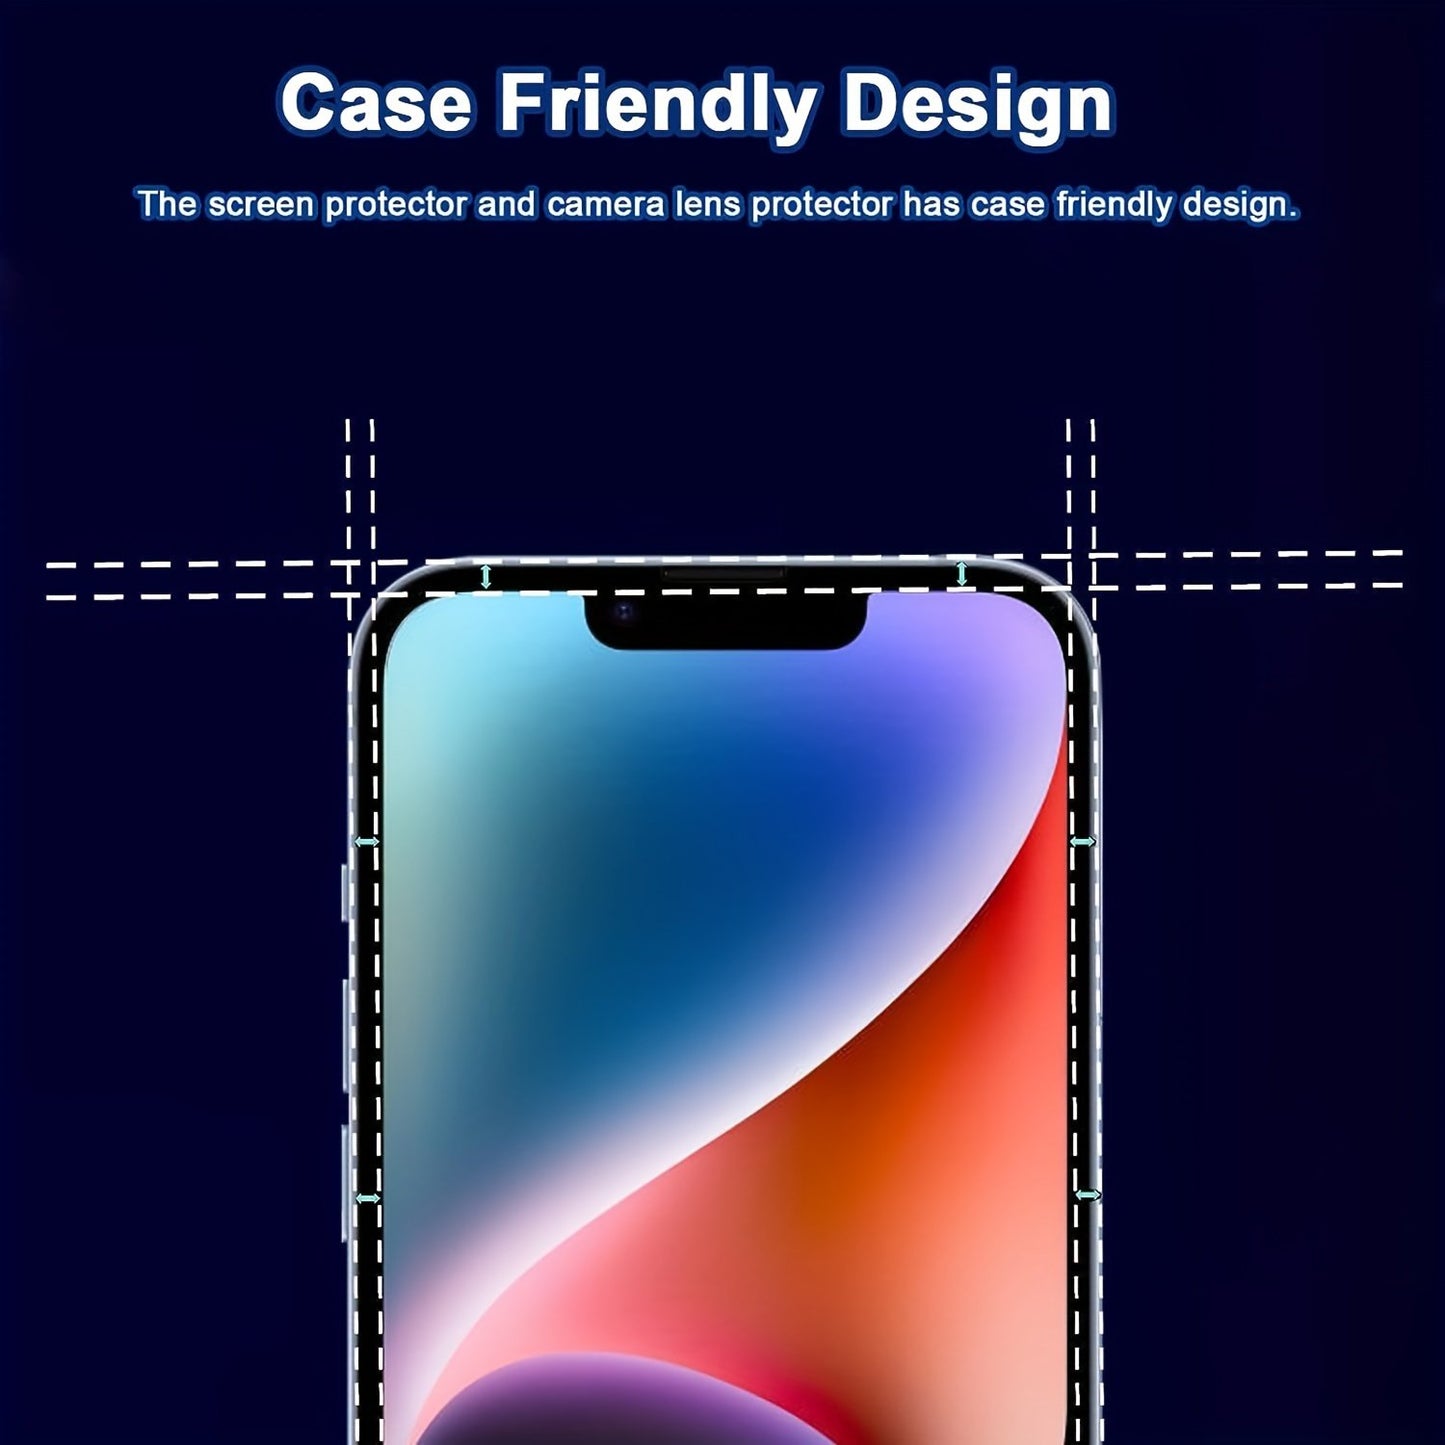 3pcs Tempered Glass Screen Protector With 3pcs Camera Lens Protector Suitable For iPhone 11/12/13/14/15 Series, Ultra-high Definition, 9H Hardness